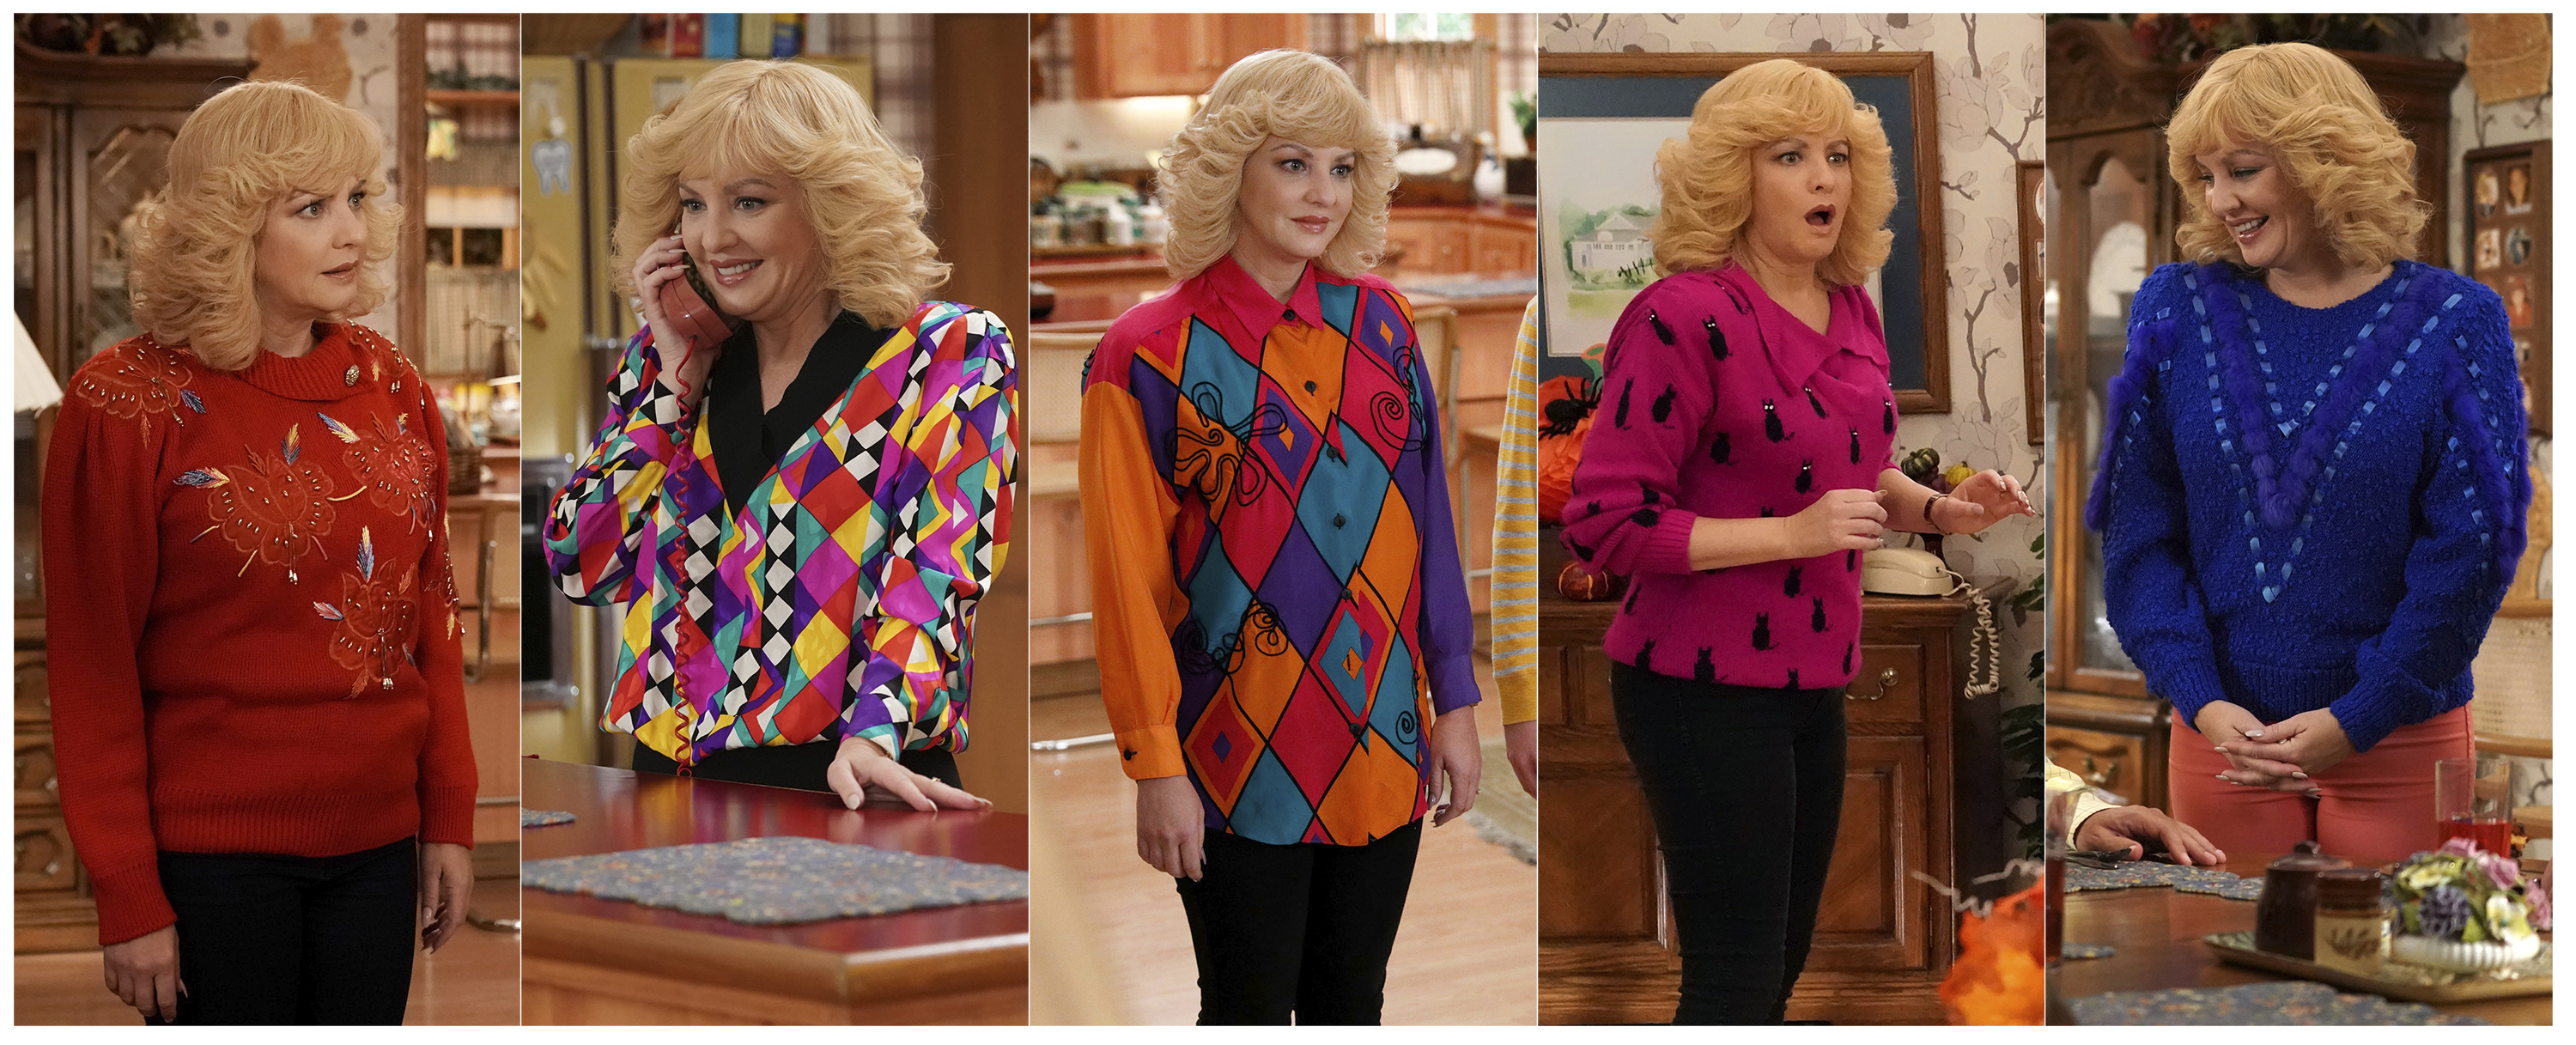 How sweaters became scene-stealers on ABC's 'The Goldbergs'